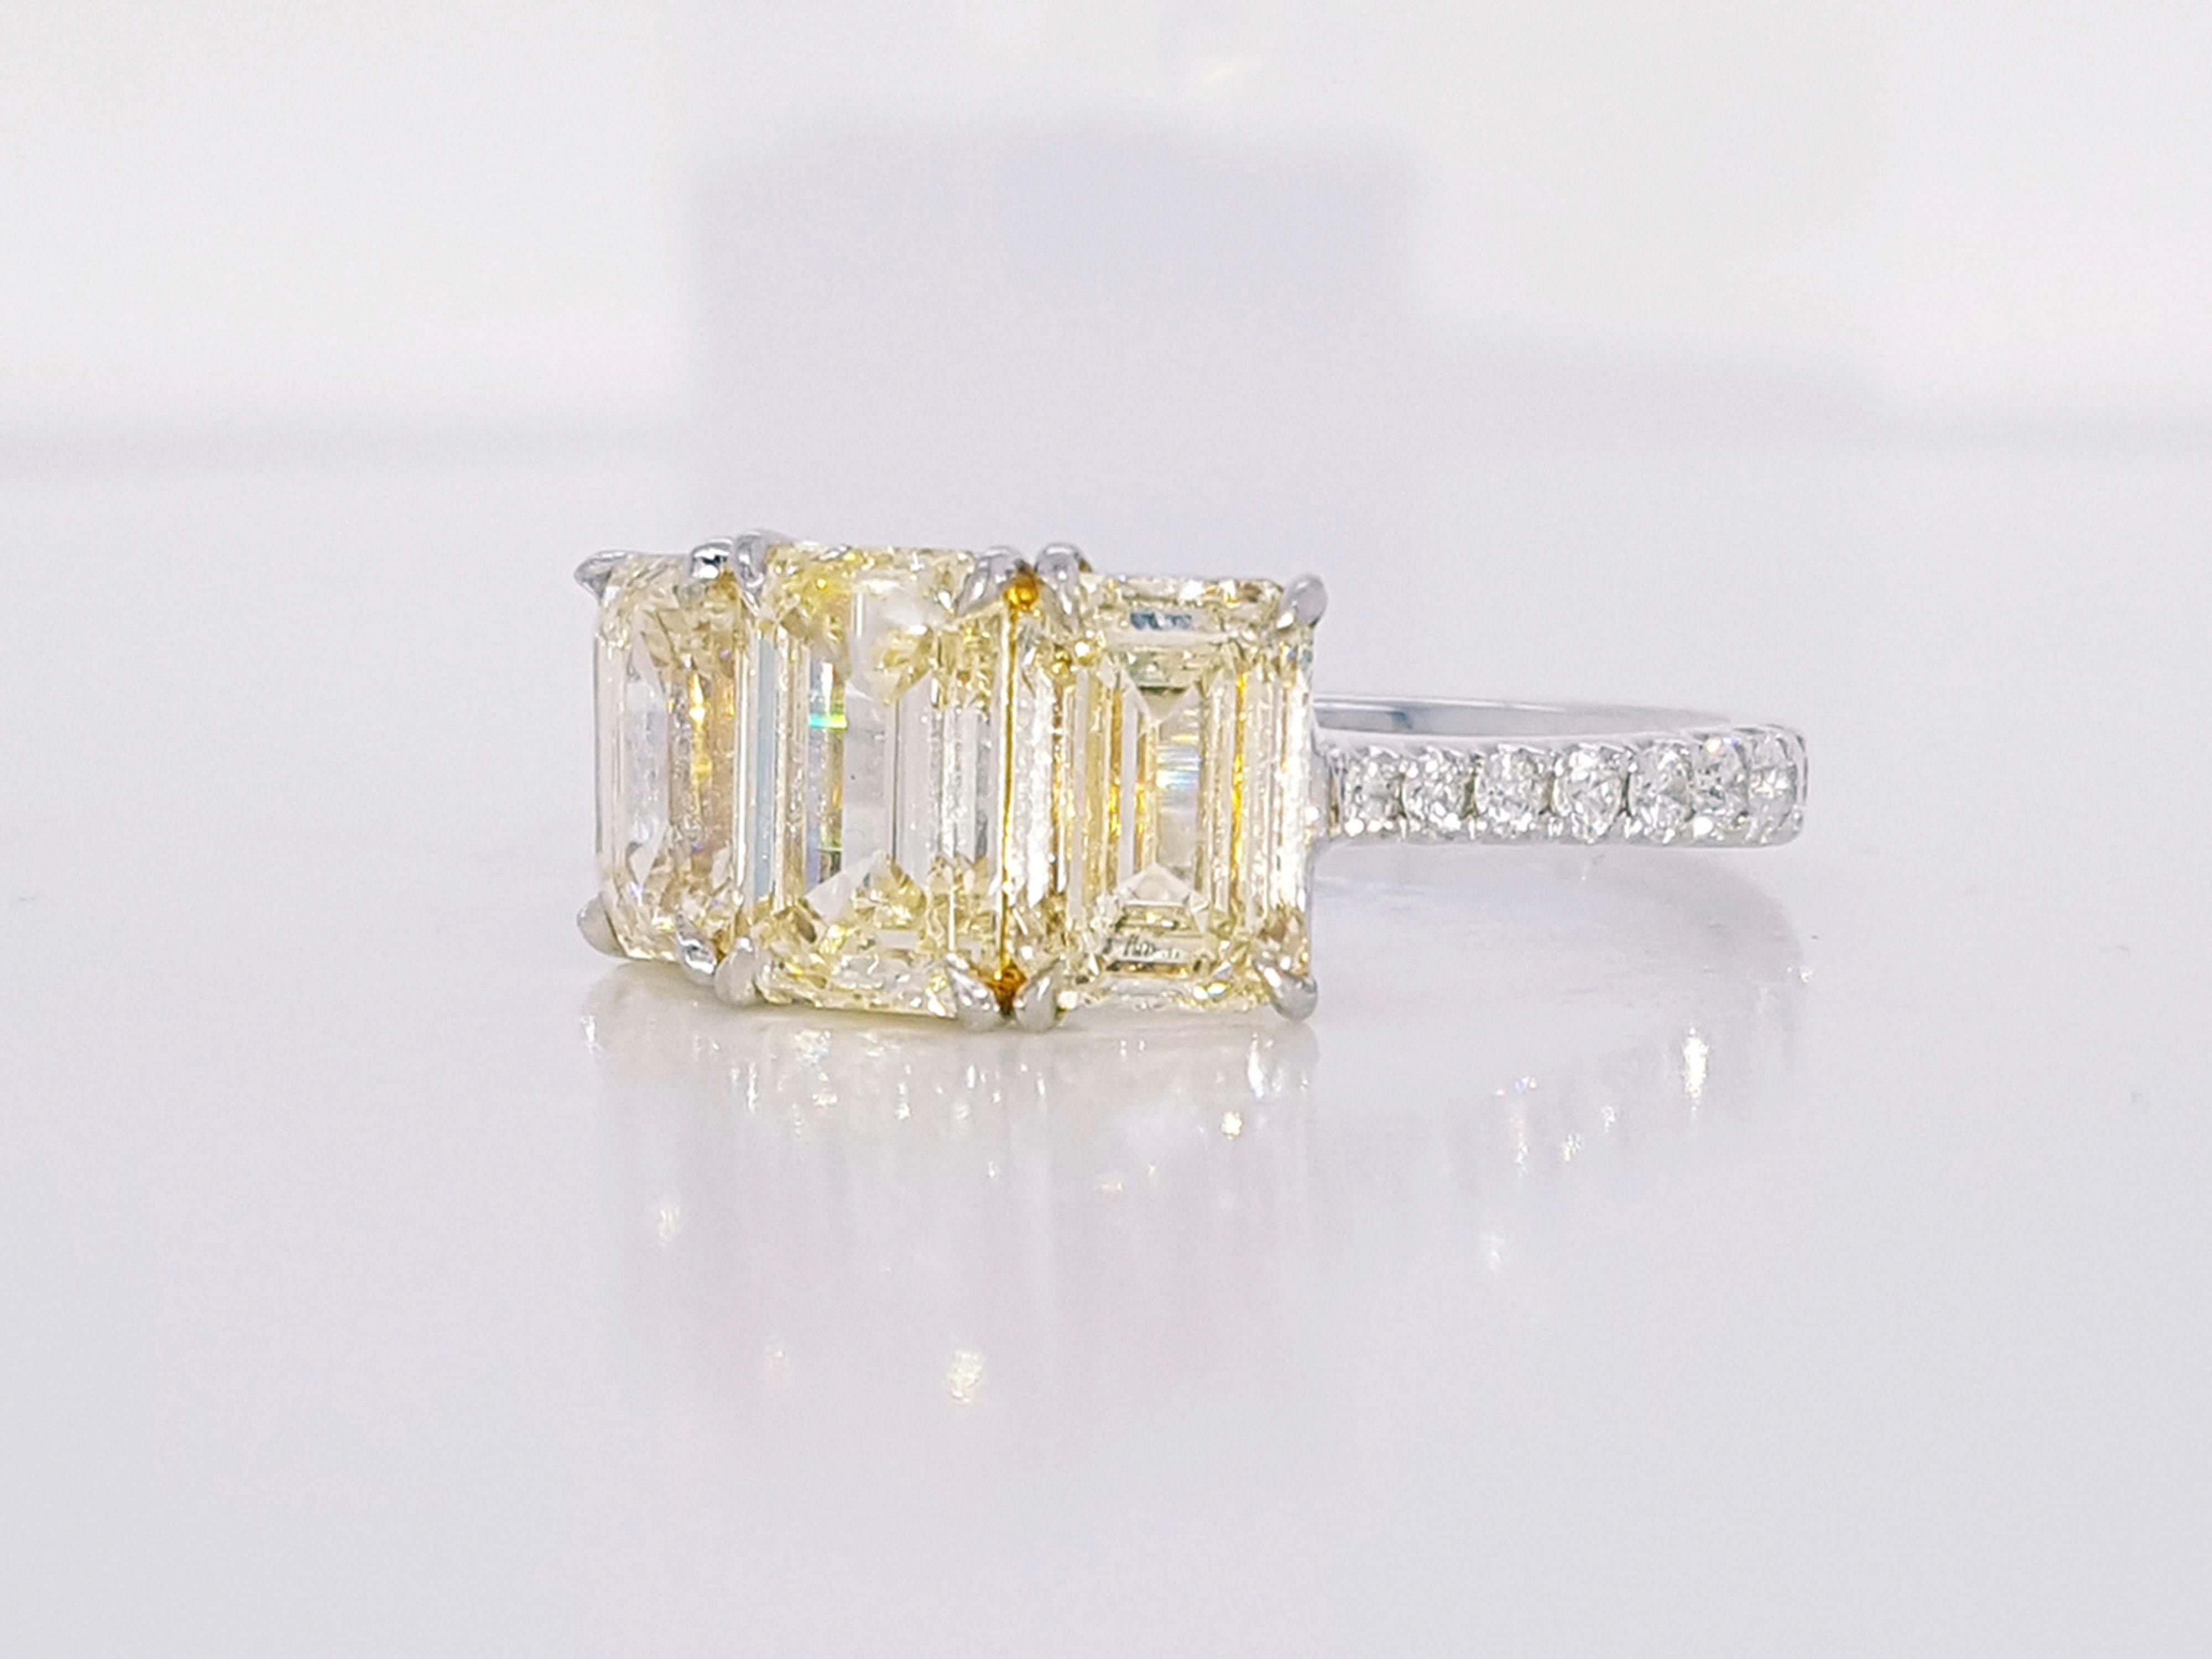 This gorgeous engagement ring features an emerald cut yellow diamond prong set in the center of a three-stone setting, showcasing a 3.35 Carat Yellow Diamond Emerald Cut Three-Stone Engagement Ring, accented by 18 round brilliant diamonds G color,